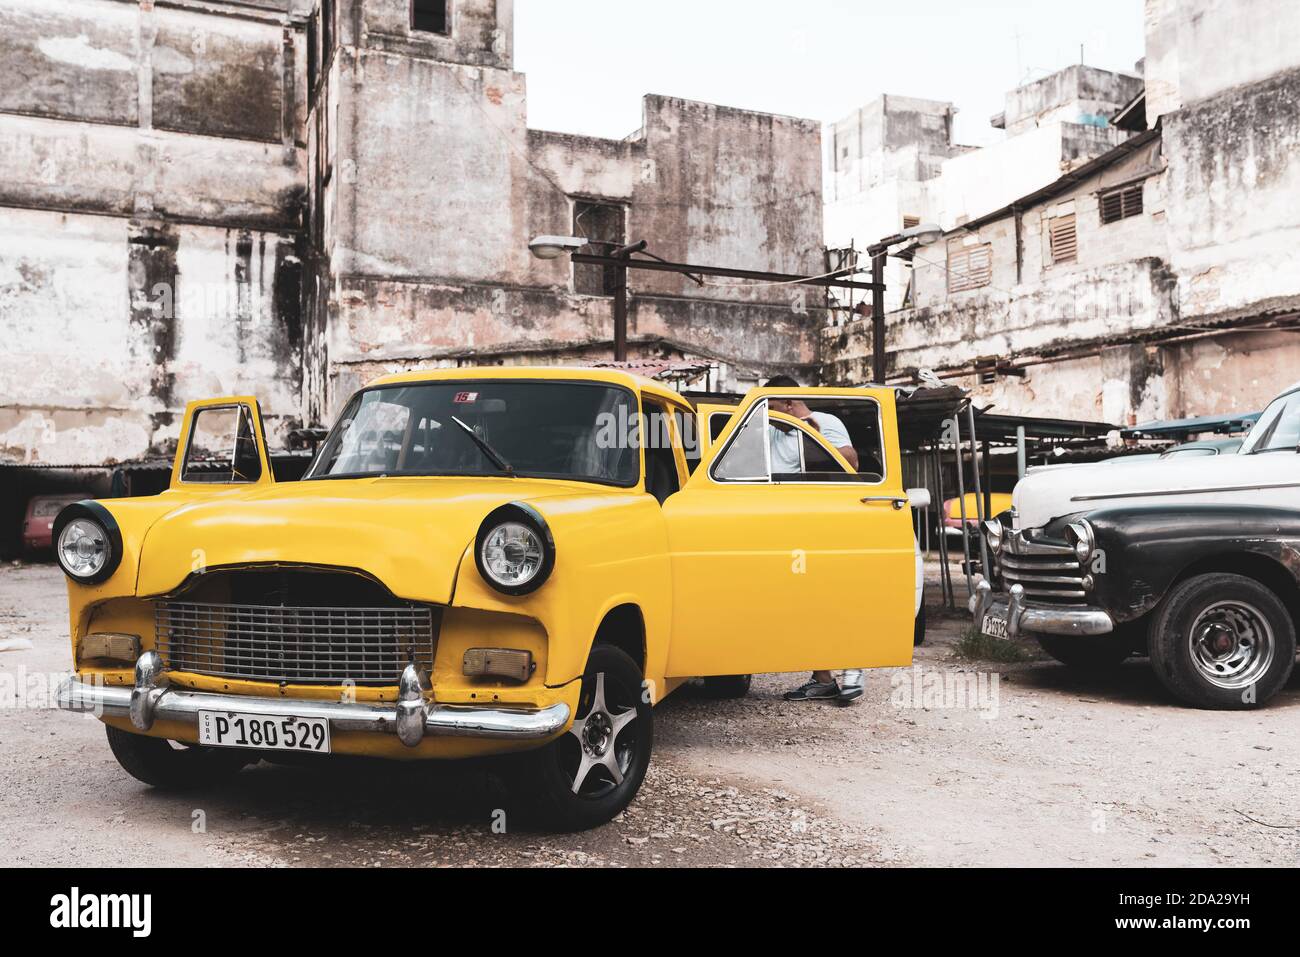 A yellow vintage car parked in Old Havana, Cuba Stock Photo